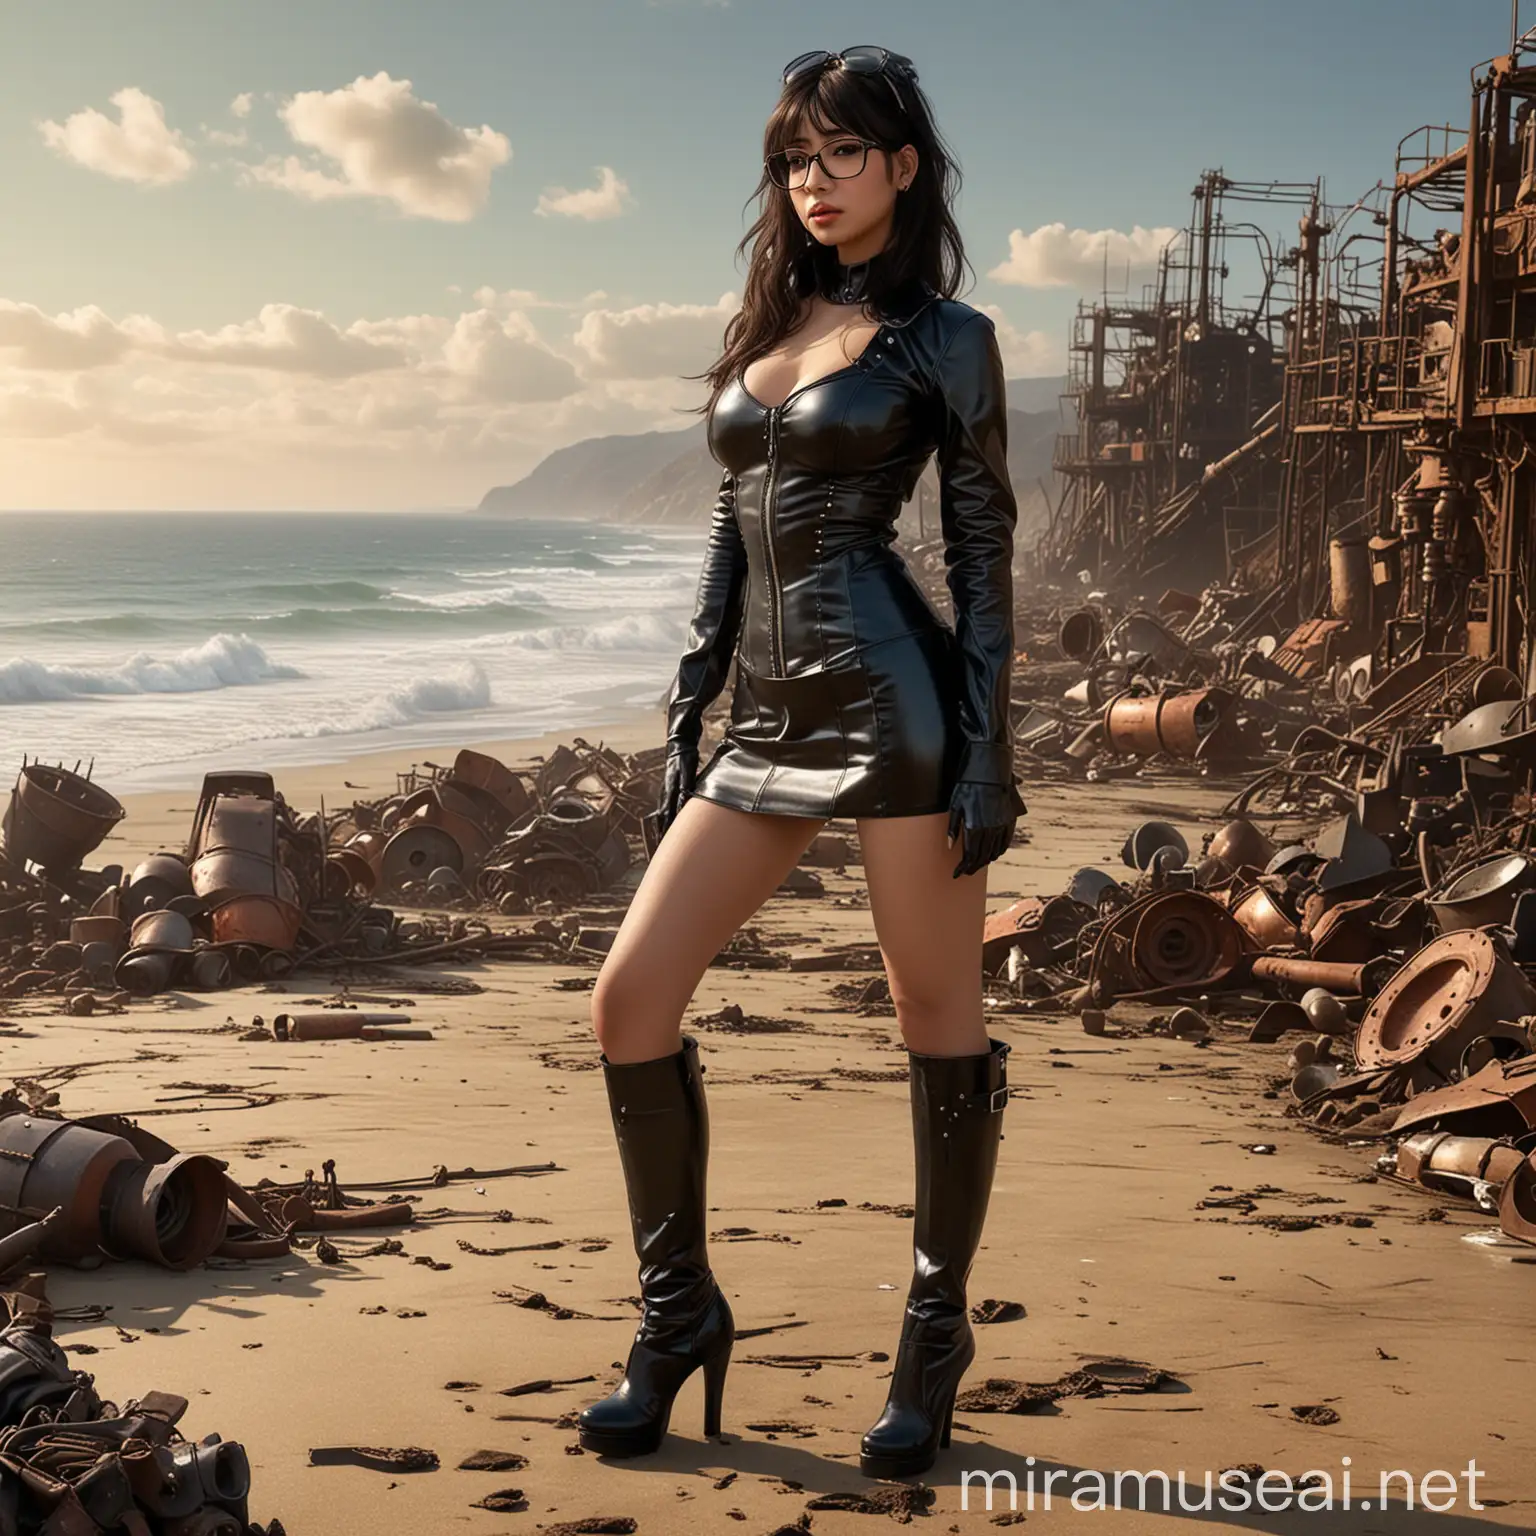 Richard, a man was playing Fallout on his PC when when he pressed the button he appeared in the game in Santa Monica State Beach and transformed into a woman, daughter of Mia Khalifa and Hitomi Tanaka, wearing a latex corset, ((latex miniskirt)) , ((high-heeled boots above the thigh)), long sleeveless latex gloves ((open spiked jacket)) large round glasses and latex earrings, Fallout World Steampunk, Aiko has a striking appearance, combining latex elements from her two famous mothers. She inherited Mia Khalifa's expressive and captivating eyes, while her curvaceous and voluptuous figure is reminiscent of Hitomi Tanaka. Her hair is long and silky, with a dark brown tone that stands out in the sun. She has an imposing and confident presence, but also radiates an aura of elegance and charm with a beautiful smile, as she walks sexily towards the camera showing her entire body, in a setting destroyed by radiation, all rusty and full of metals, with the sea in the background, epic masterpiece, cinematic experience, 8k, fantasy digital art, HDR, UHD. This contrast between the fantastical character and the more traditional color scheme and elements gives the piece an intriguing narrative quality. The model is sitting on the sand in a sexy position looking at
  to the camera. old junkyard,,((wearing a latex backpack))